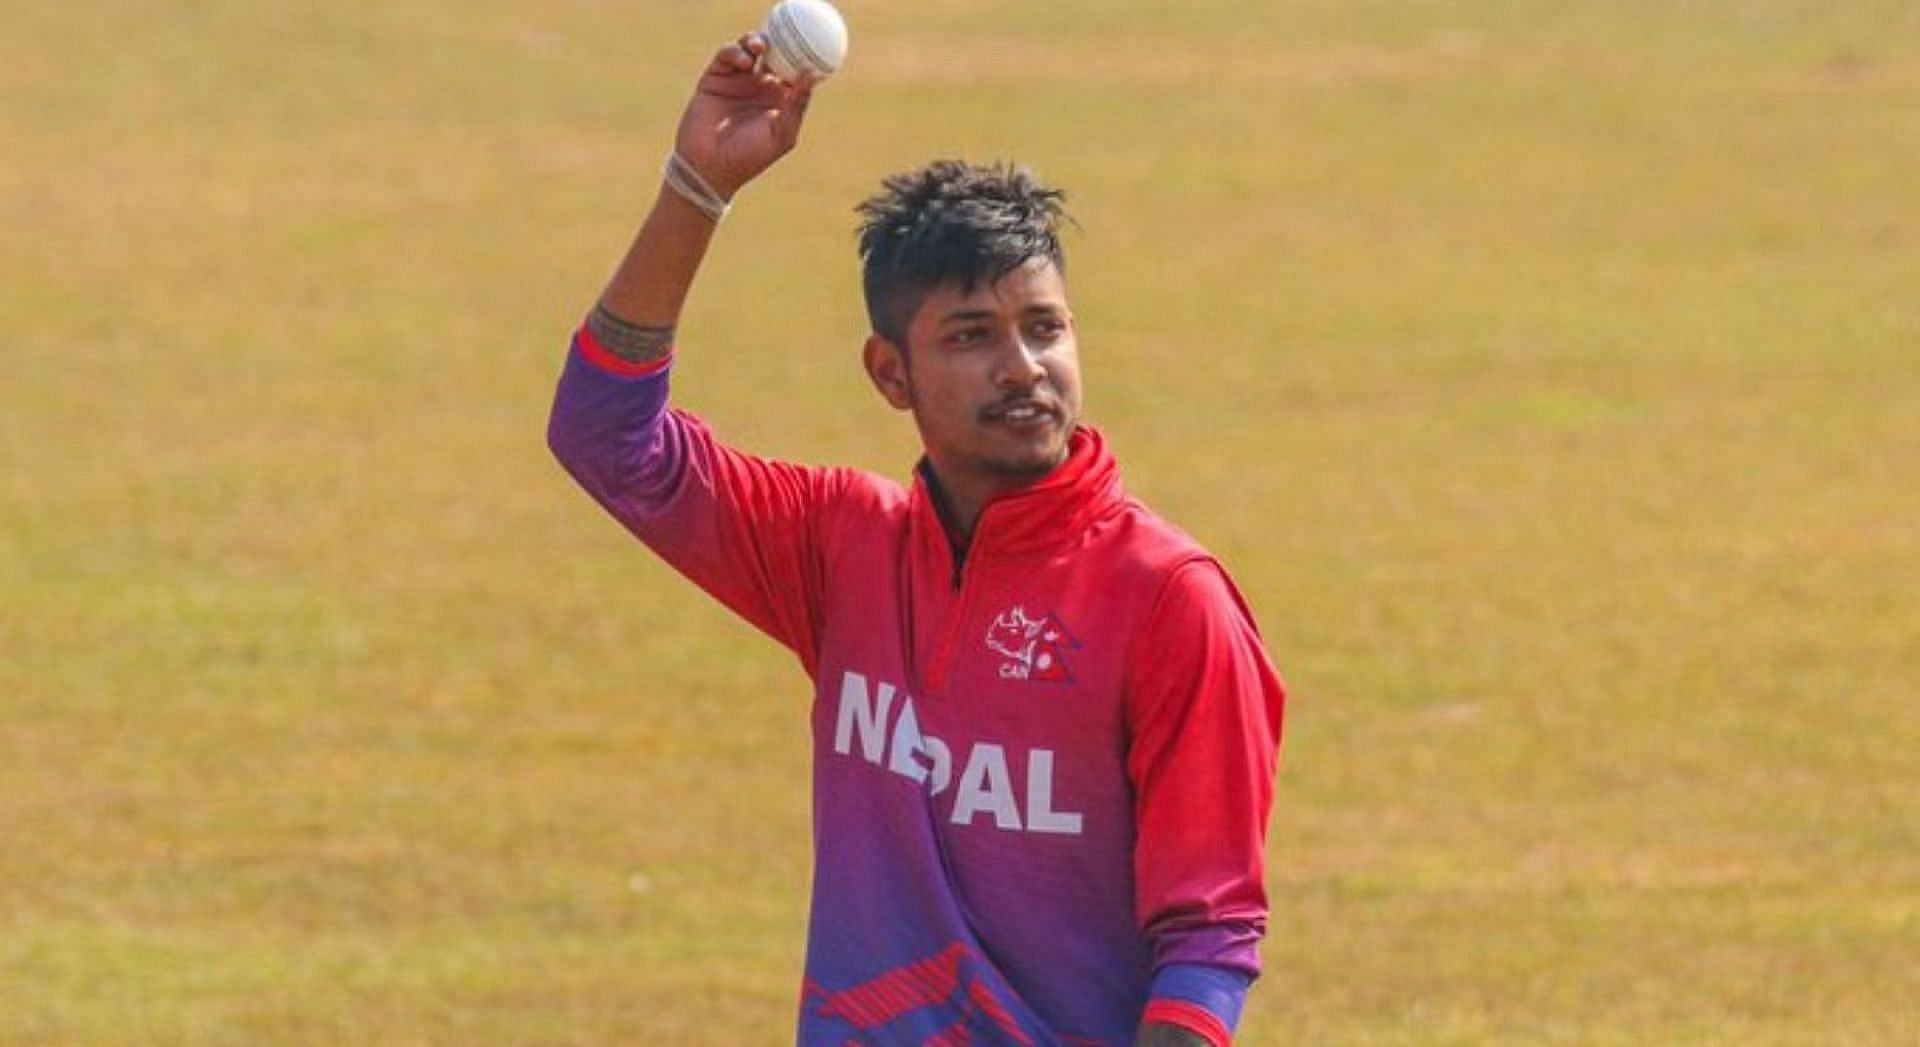 Kathmandu District Court convicts Sandeep Lamichhane of rape, jail term for Nepal cricketer to be determined soon